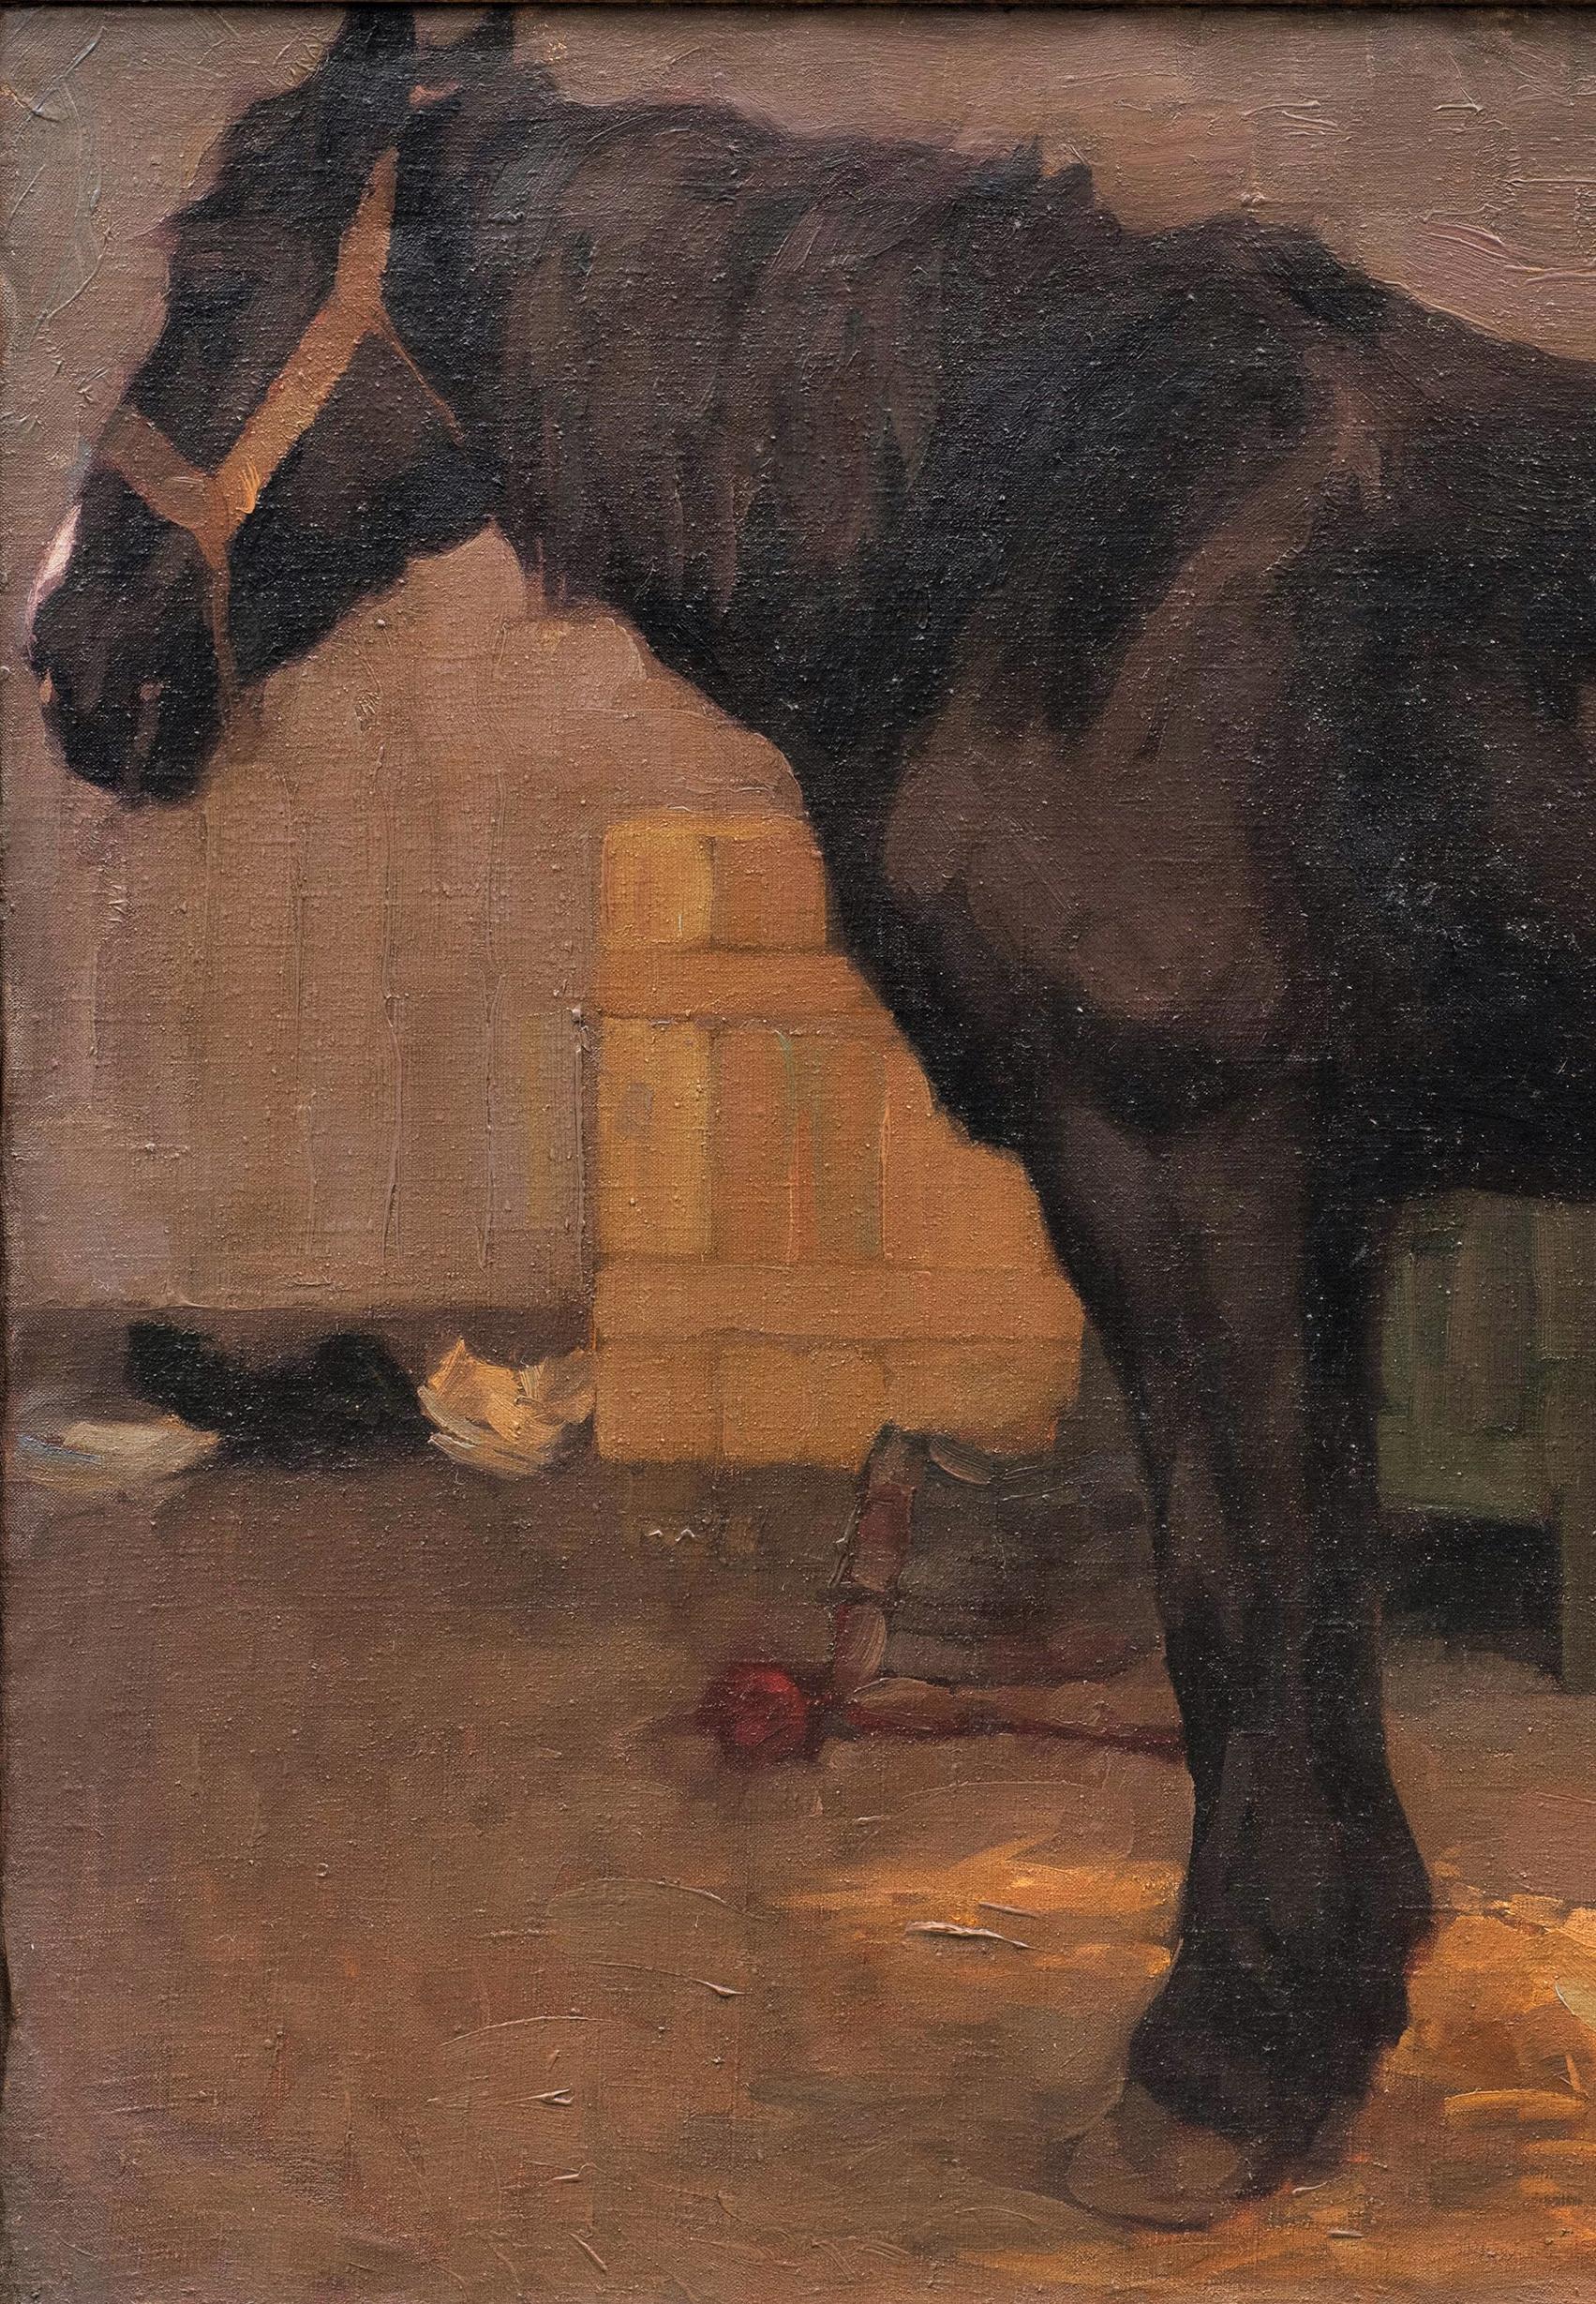 Antique Horse Painting
“Standing Horse in the Stable”
Georg Wolf (Alsace/Germany 1882-1962)
Oil on canvas
39 1/2 x 21 1/2 (46 1/4 x 38 1/4 frame) inches
Estate stamp and inventory No. 178 on the back of the frame. 

This very large canvas creates an